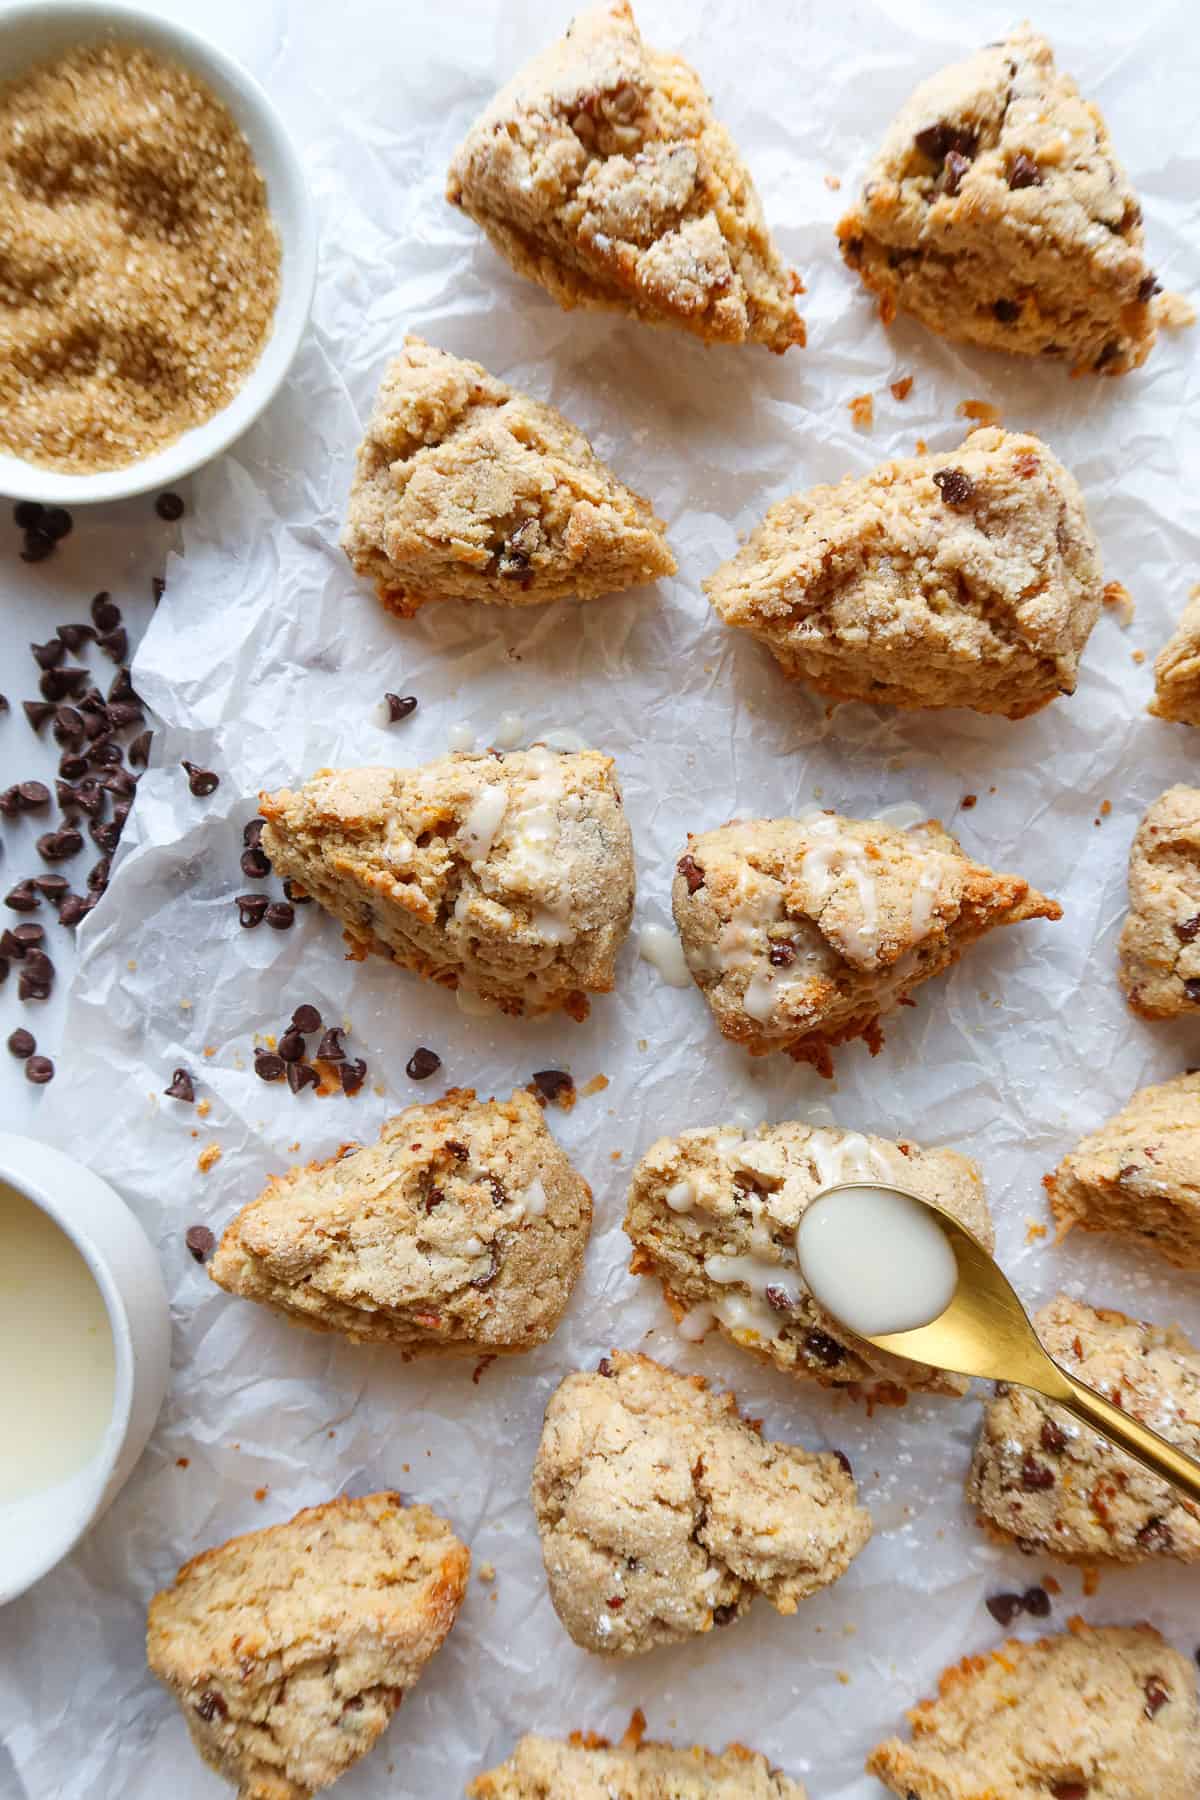 Almond flour scones with orange and chocolate chips.